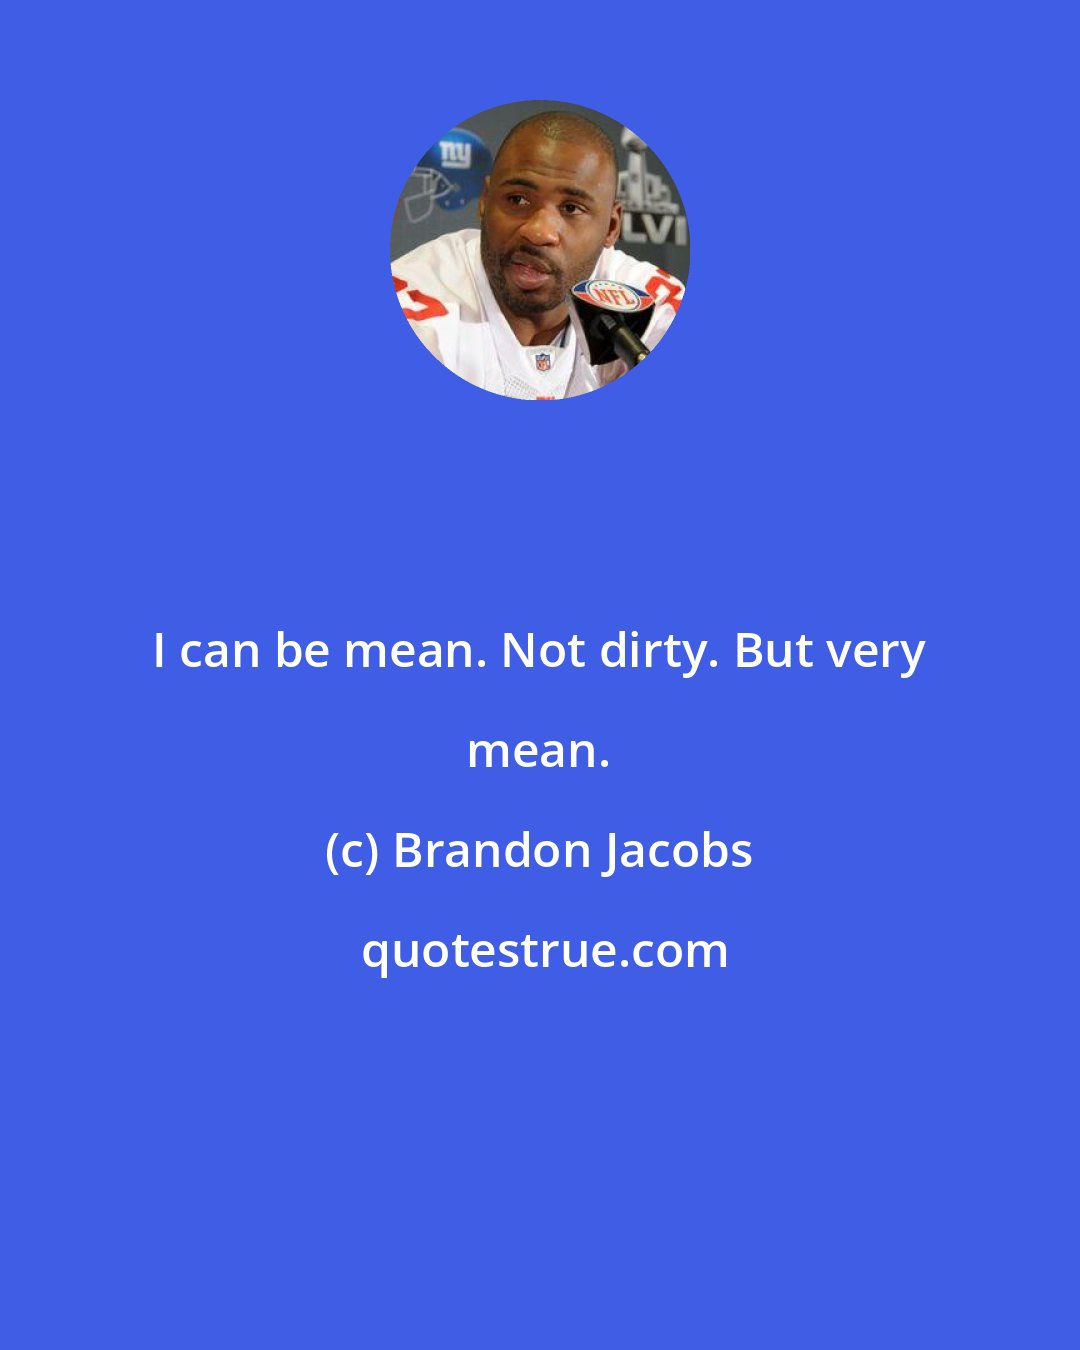 Brandon Jacobs: I can be mean. Not dirty. But very mean.